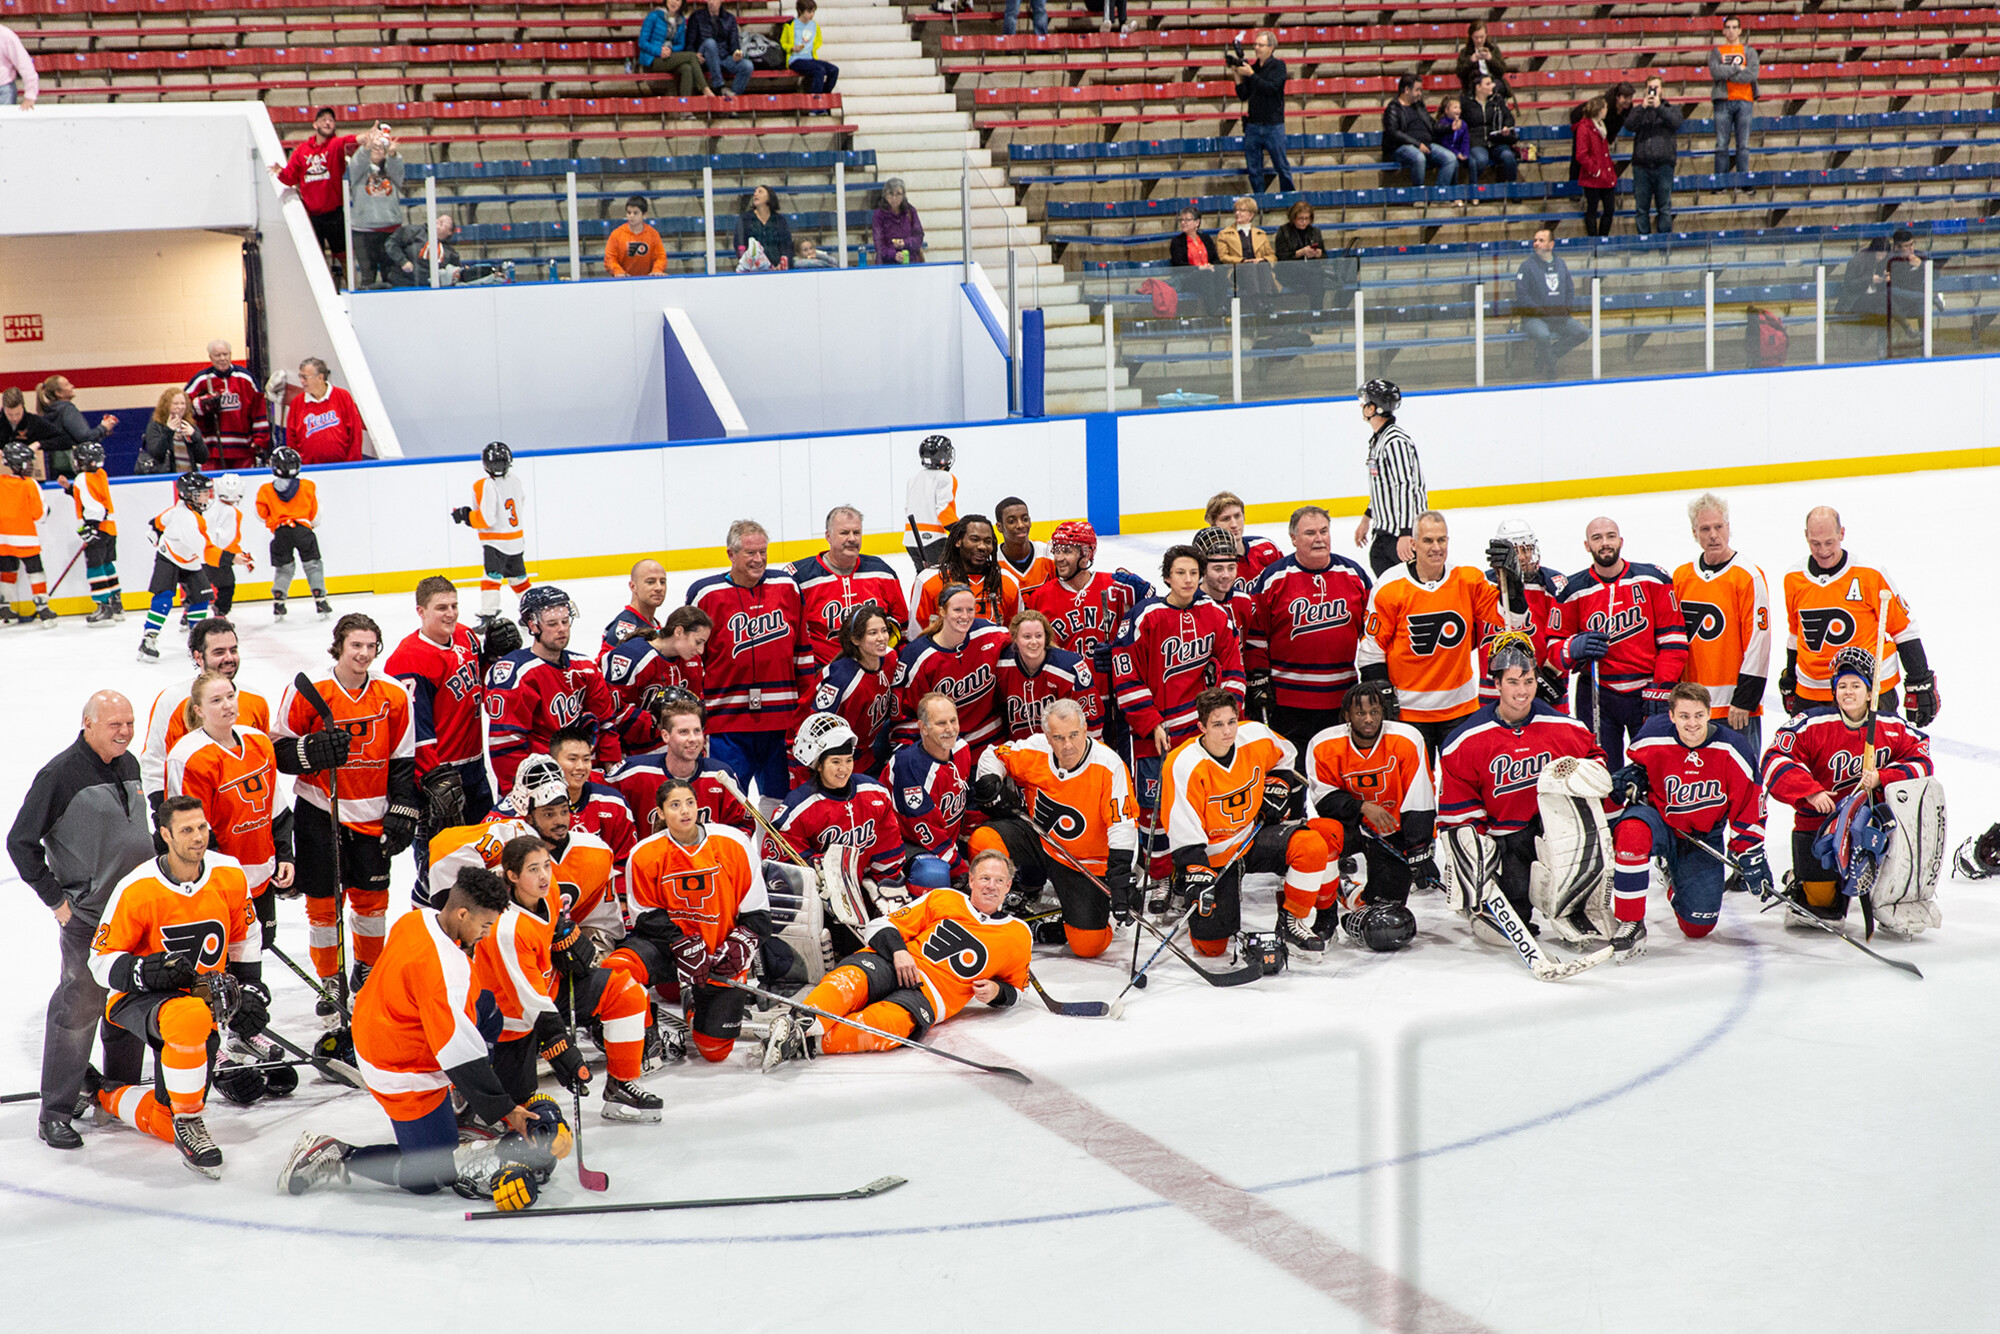 Team portrait of the Flyers at the Penn Skating Rink